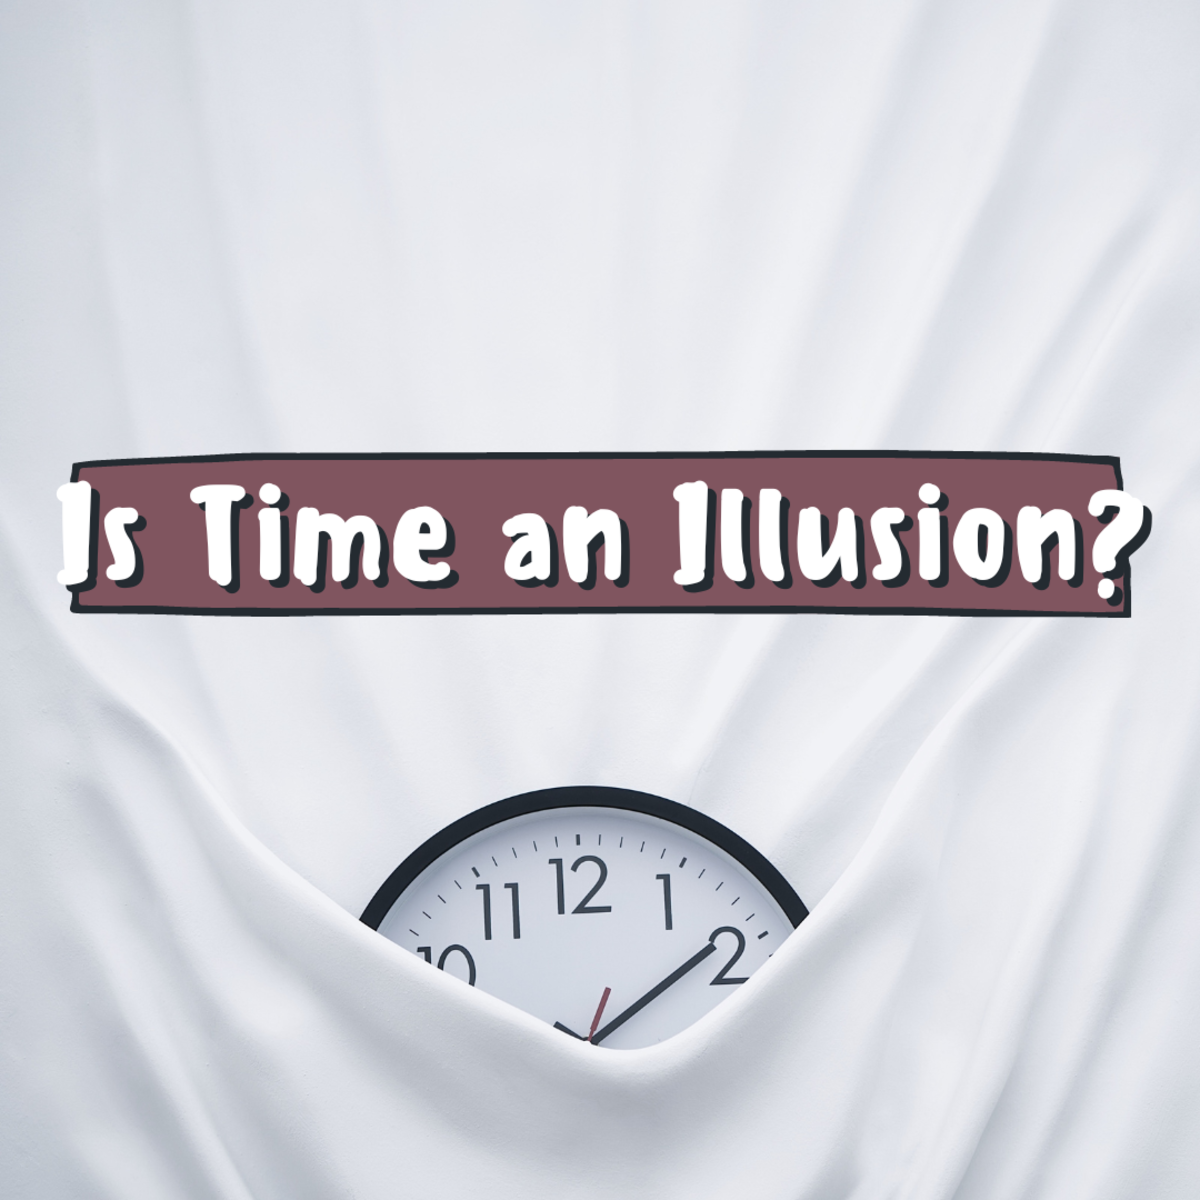 Time is an illusion – or is it? Some have argued that time is an illusion of the mind – but if time is an illusion why do we age? Read on to learn more about this complex subject.